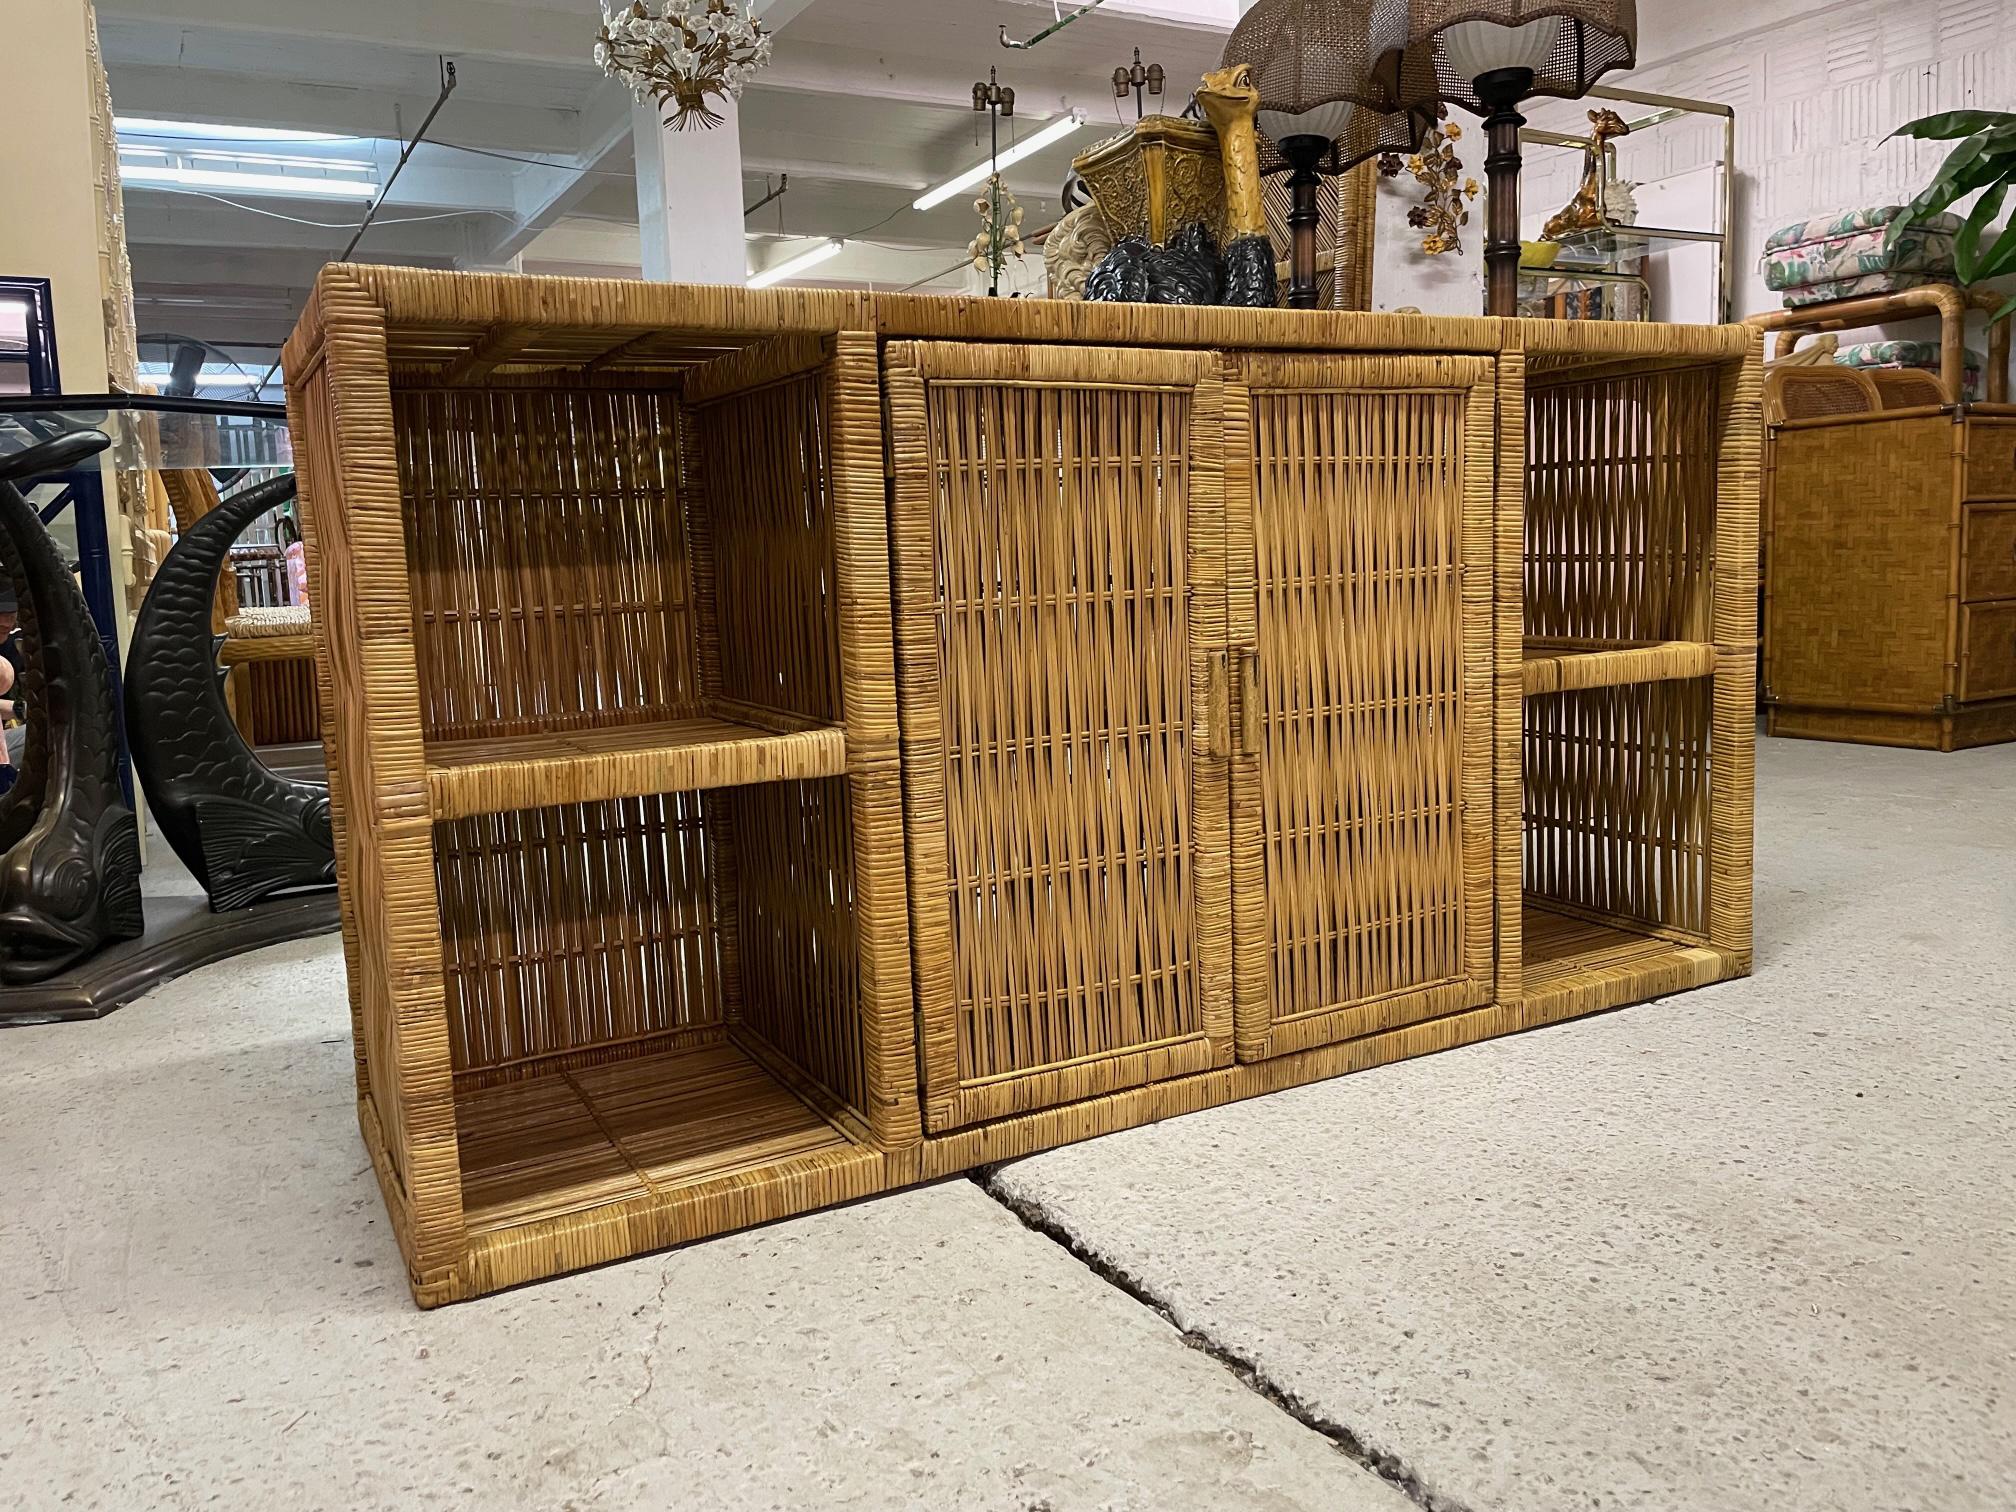 Vintage credenza or buffet feature a woven wicker design with double doors, shelving for display, and a smoked glass top. Good condition with imperfections consistent with age, see photos for condition details.